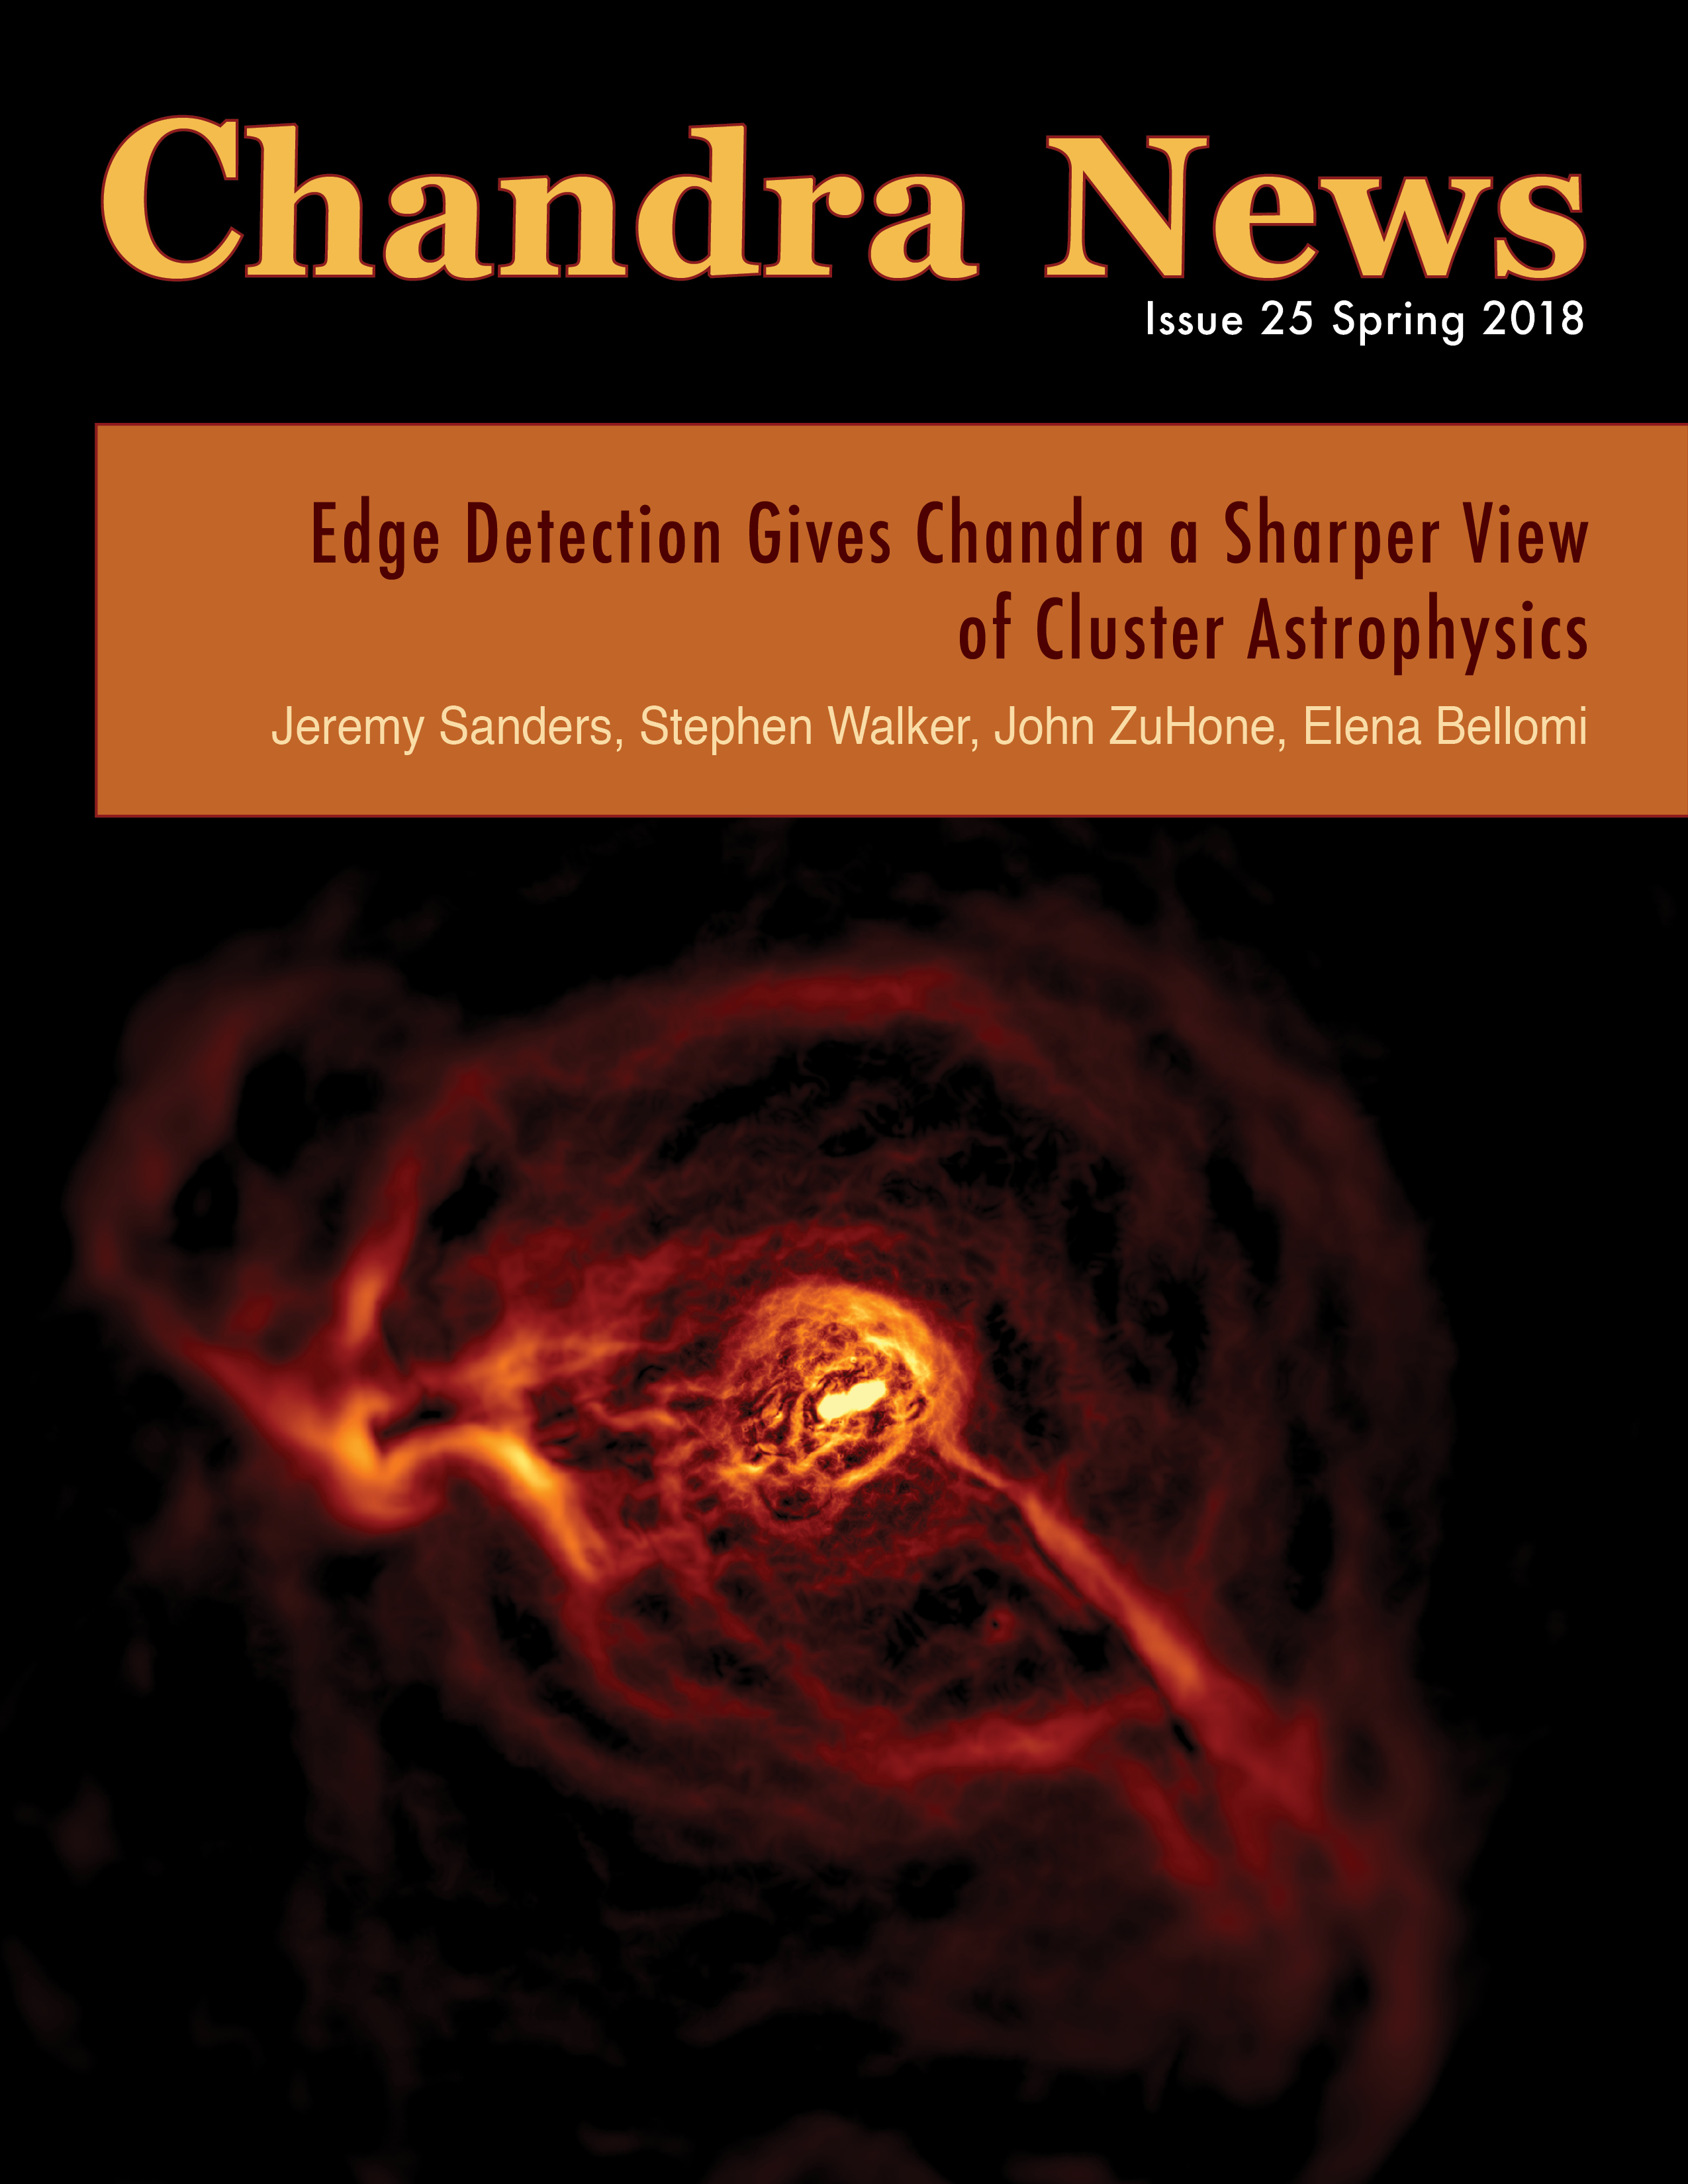 Cover of the Chandra Newsletter, Issue 25.